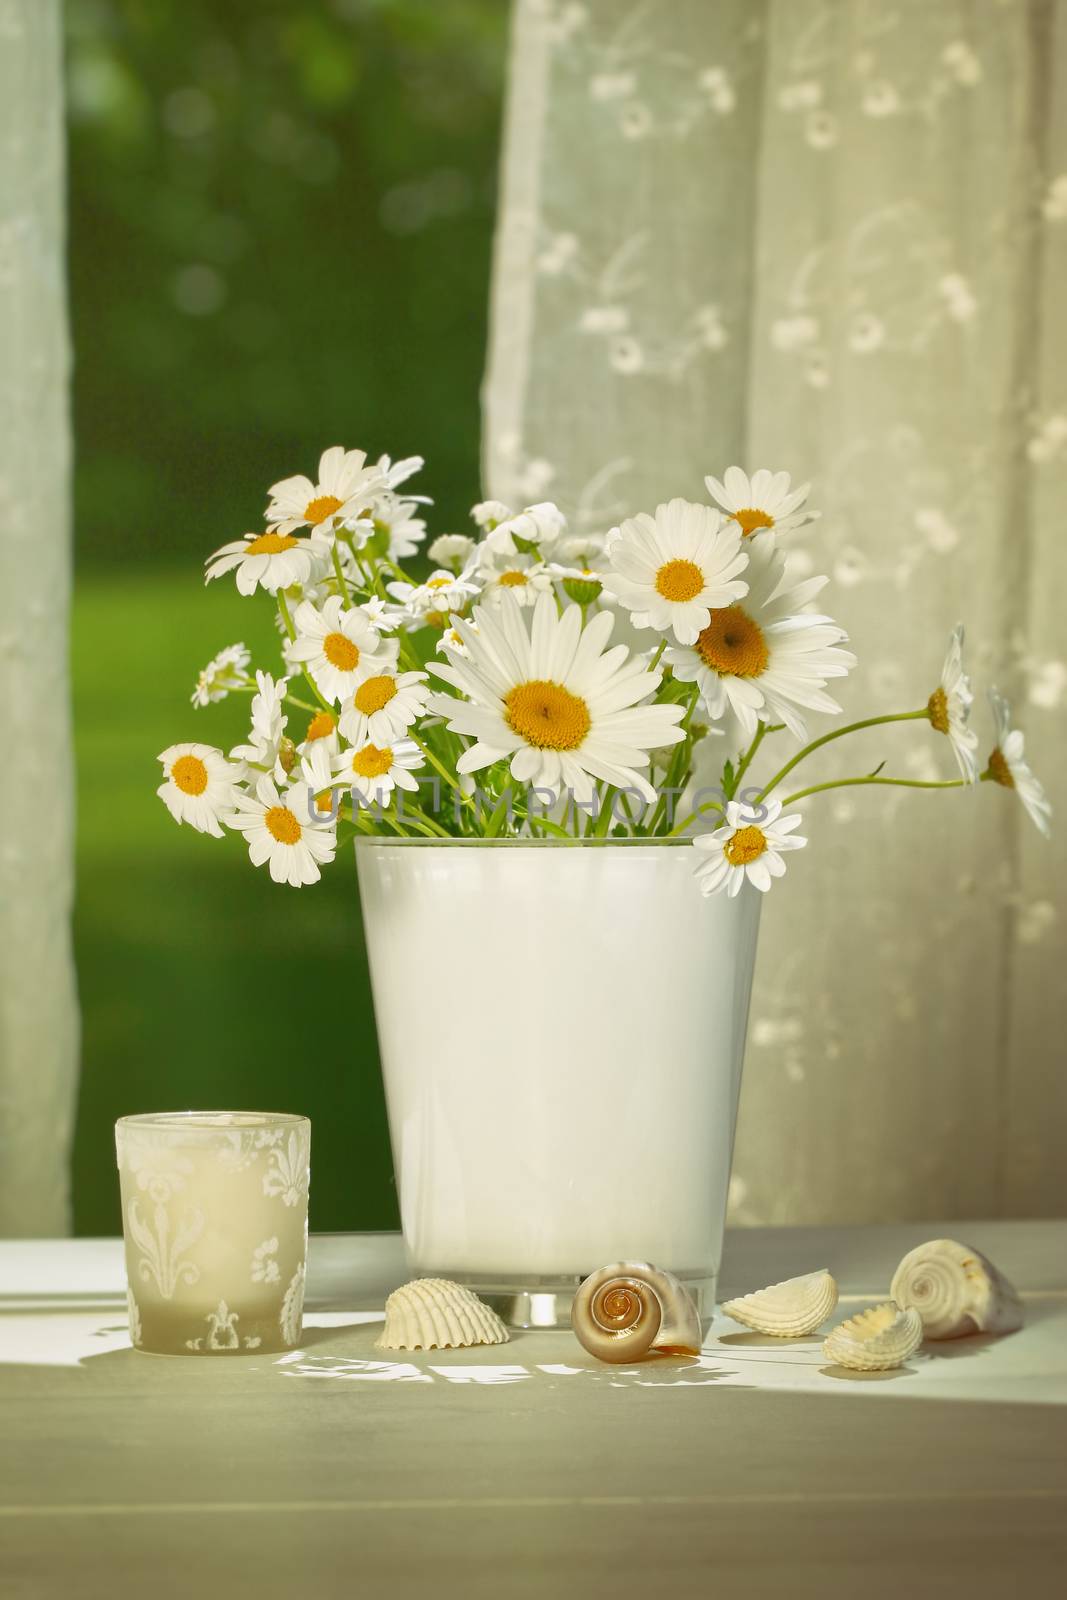 Summer daisies in front of window by Sandralise